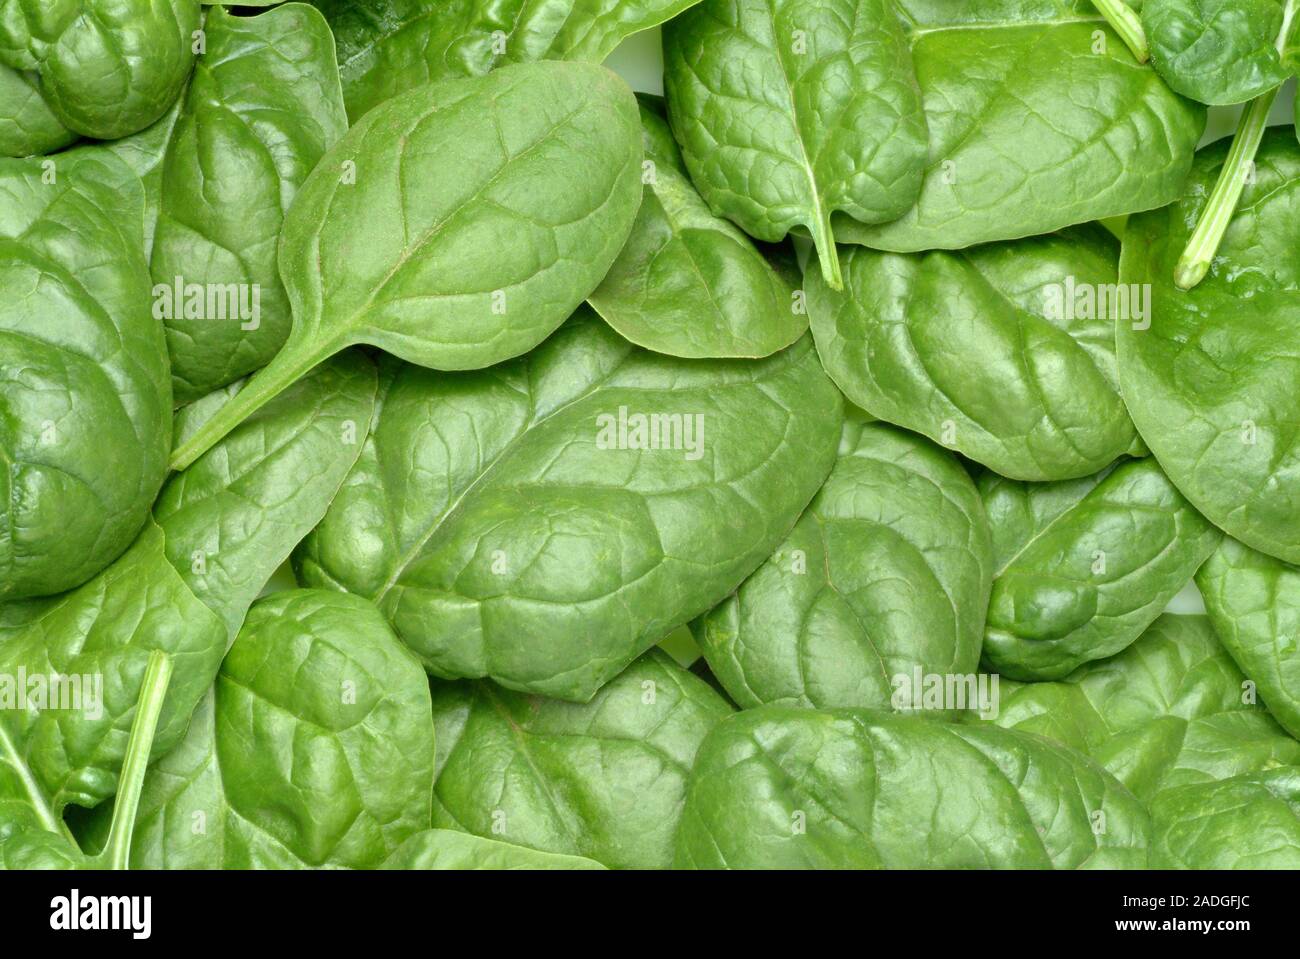 Spinach leaves (Spinacia oleracea). These leaves are picked from the immature plant when close to the ground. Spinach is a vegetable rich in beta- car Stock Photo